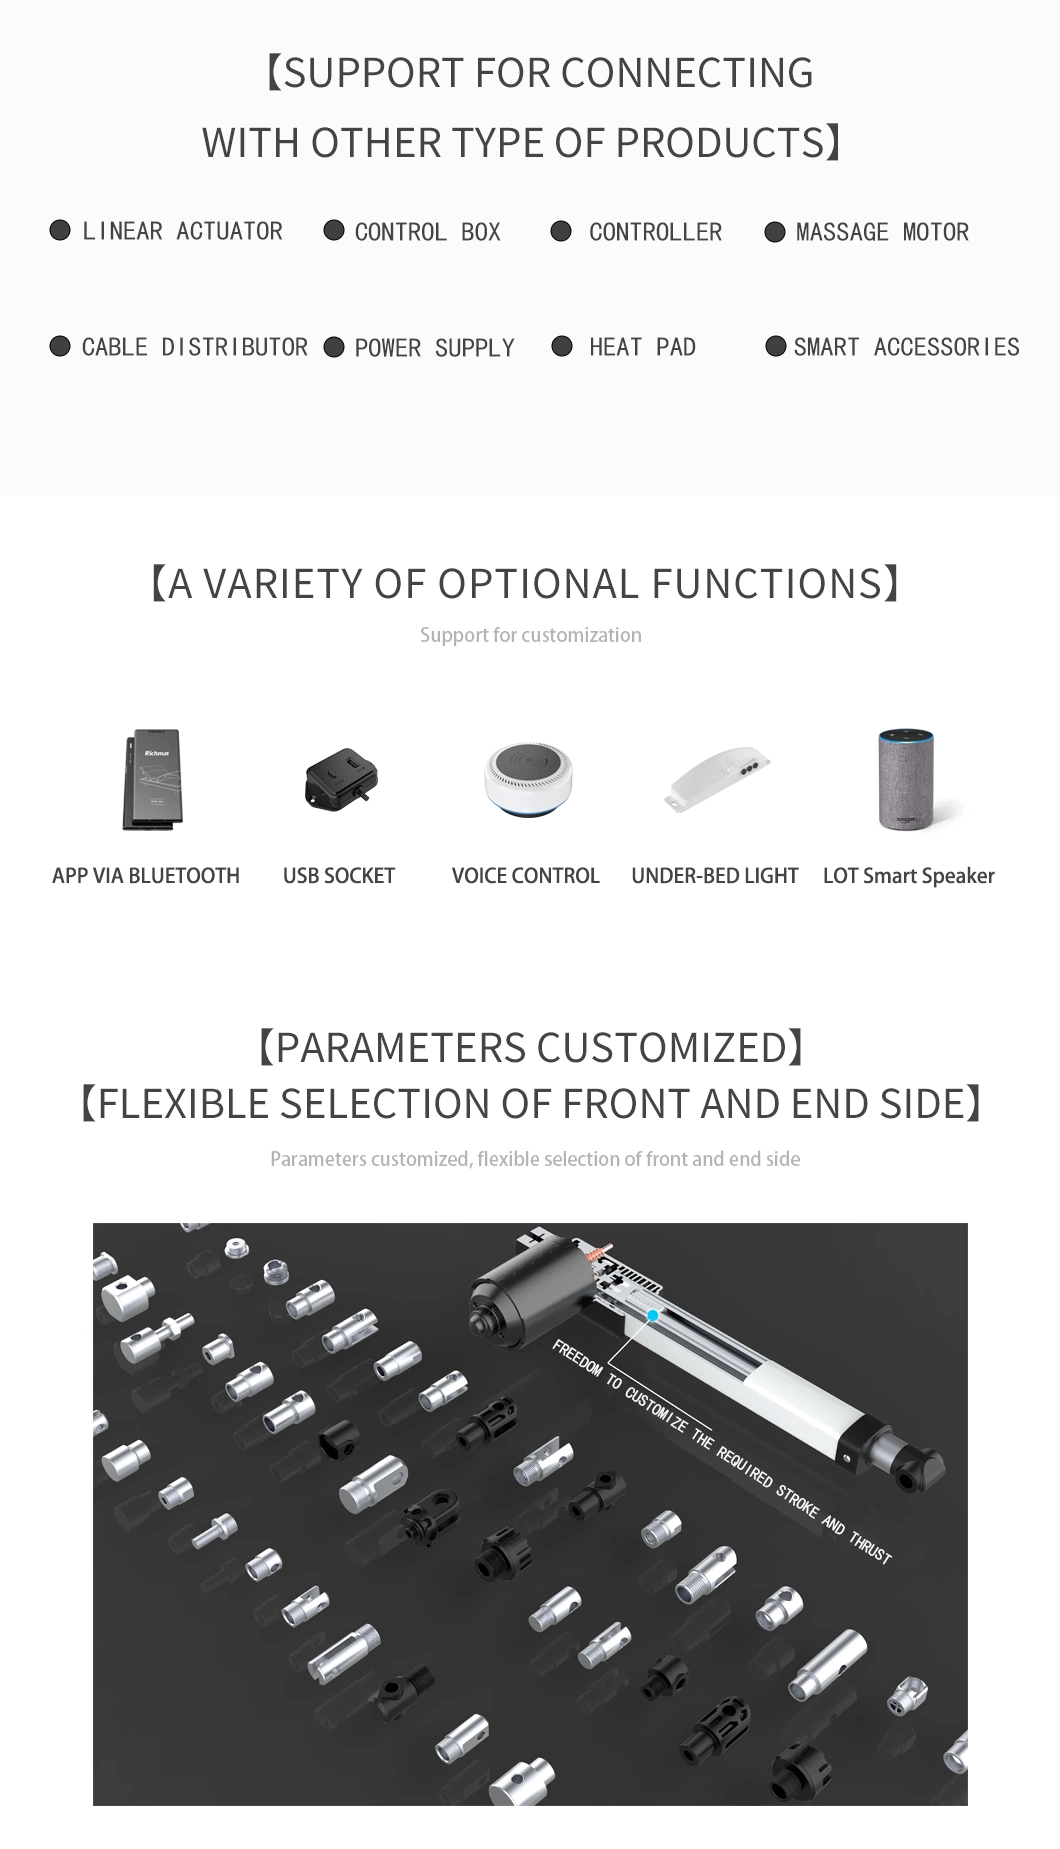 Richmat 8000n China Supplier of Linear Actuator with Customized Service